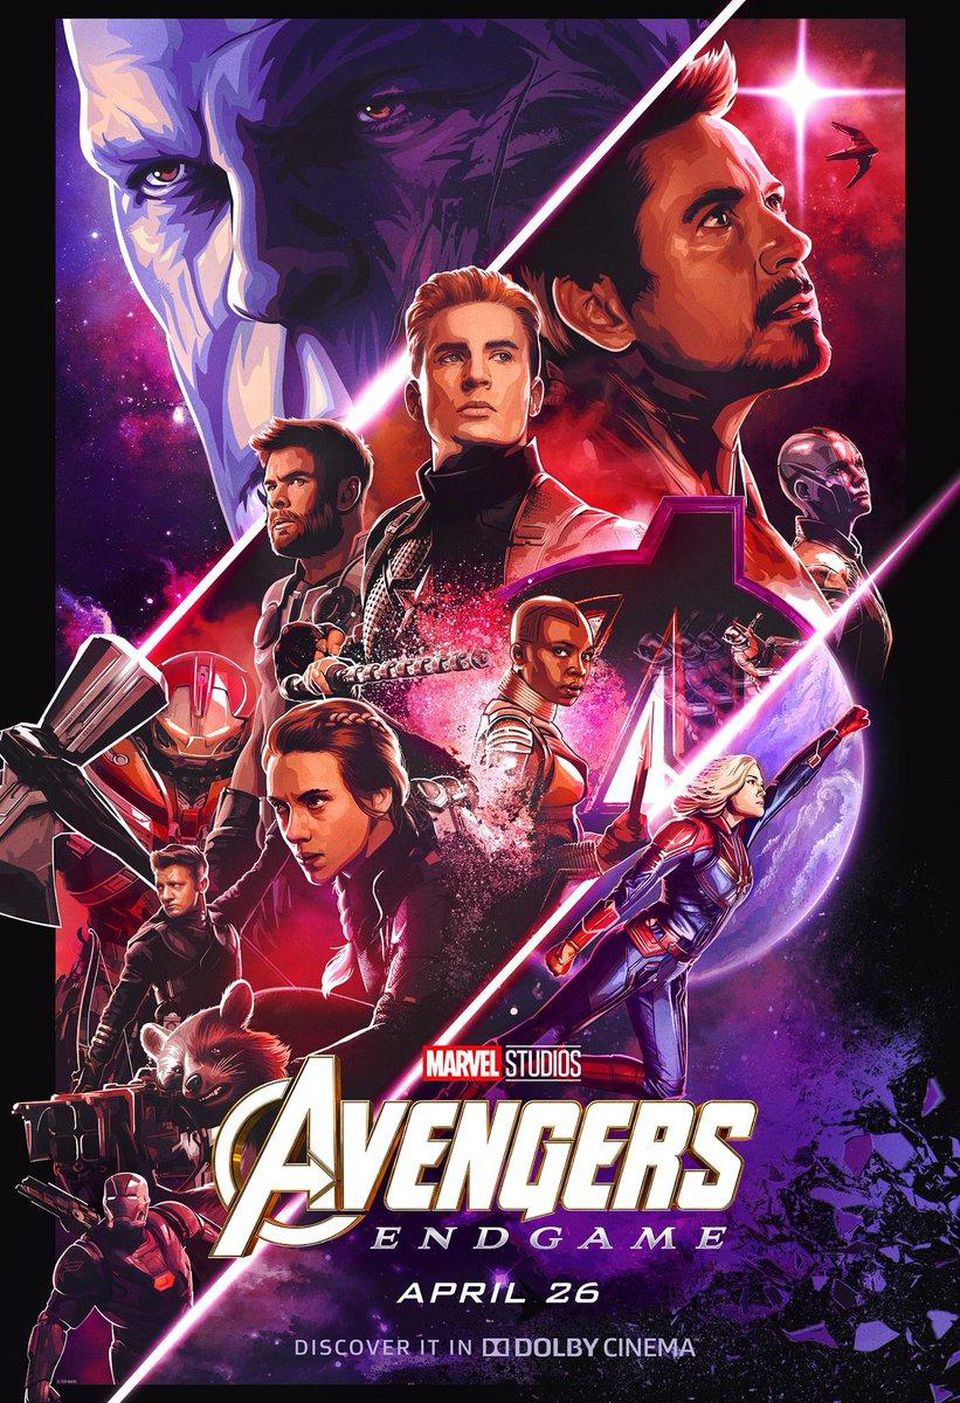 Marvel ~ Avengers: End Game (2019) Movie Review - Virily